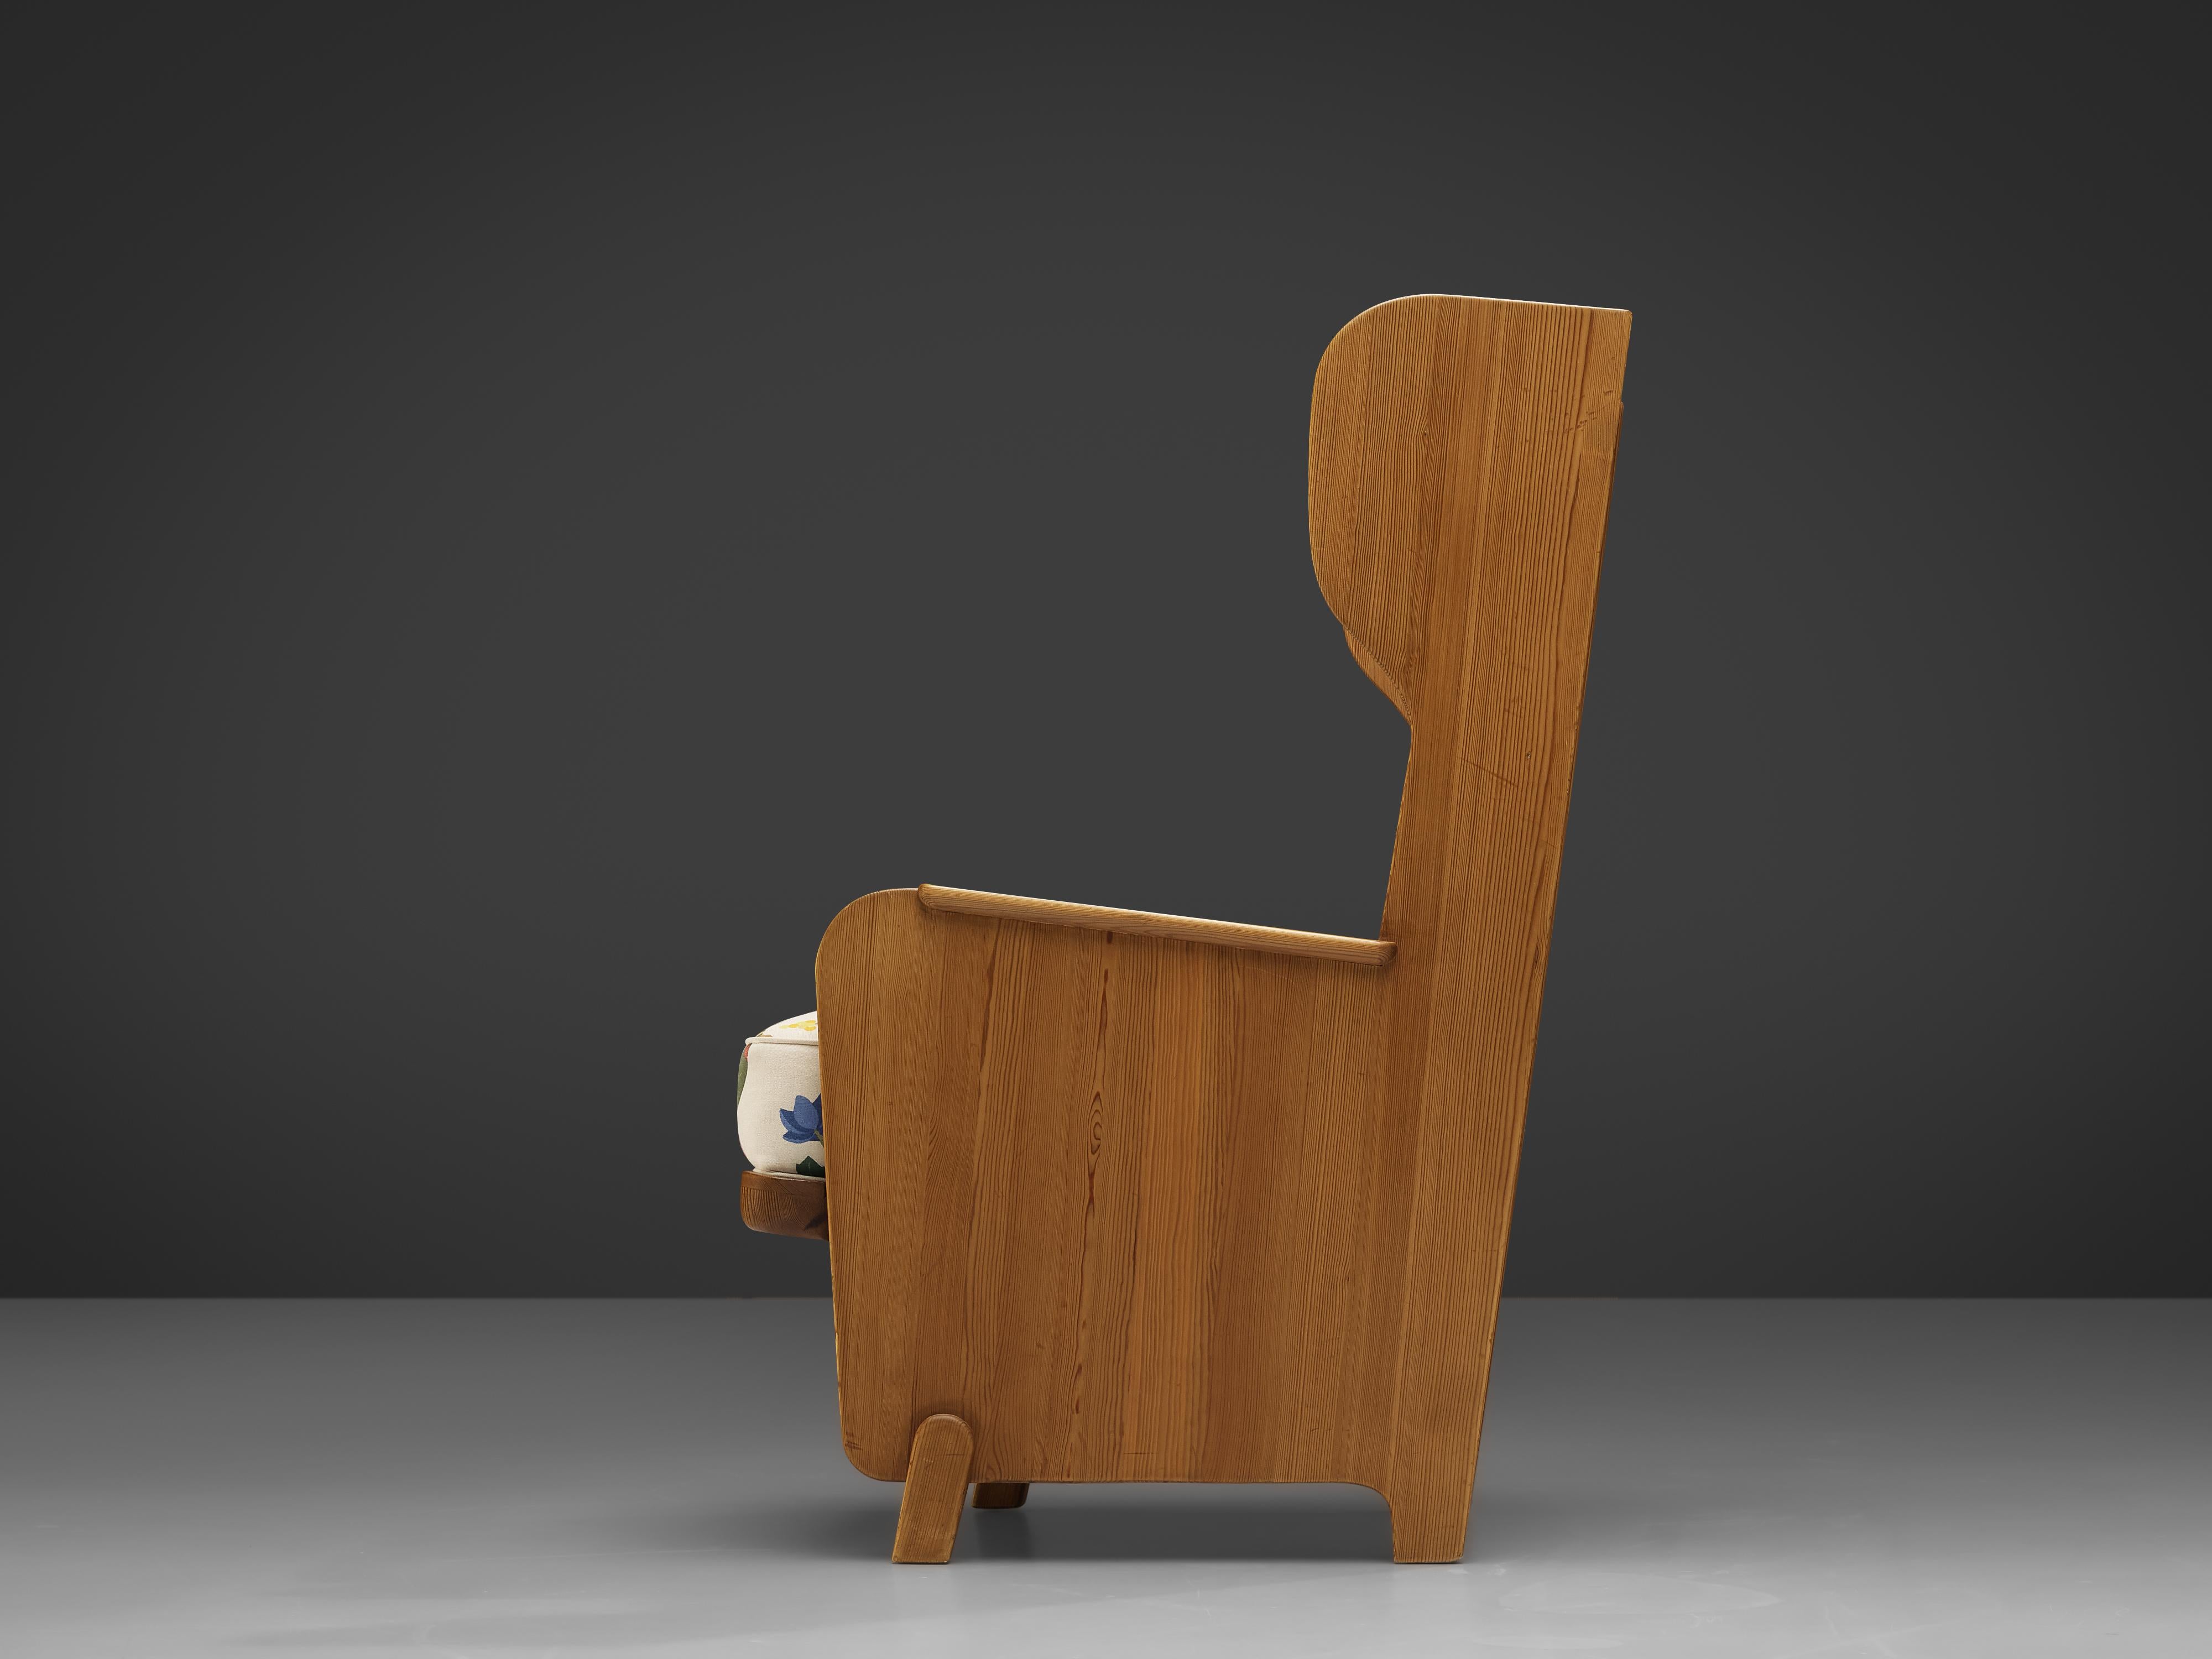 Upholstery Axel Einar Hjorth 'Lovö' Lounge Chair in Solid Pine